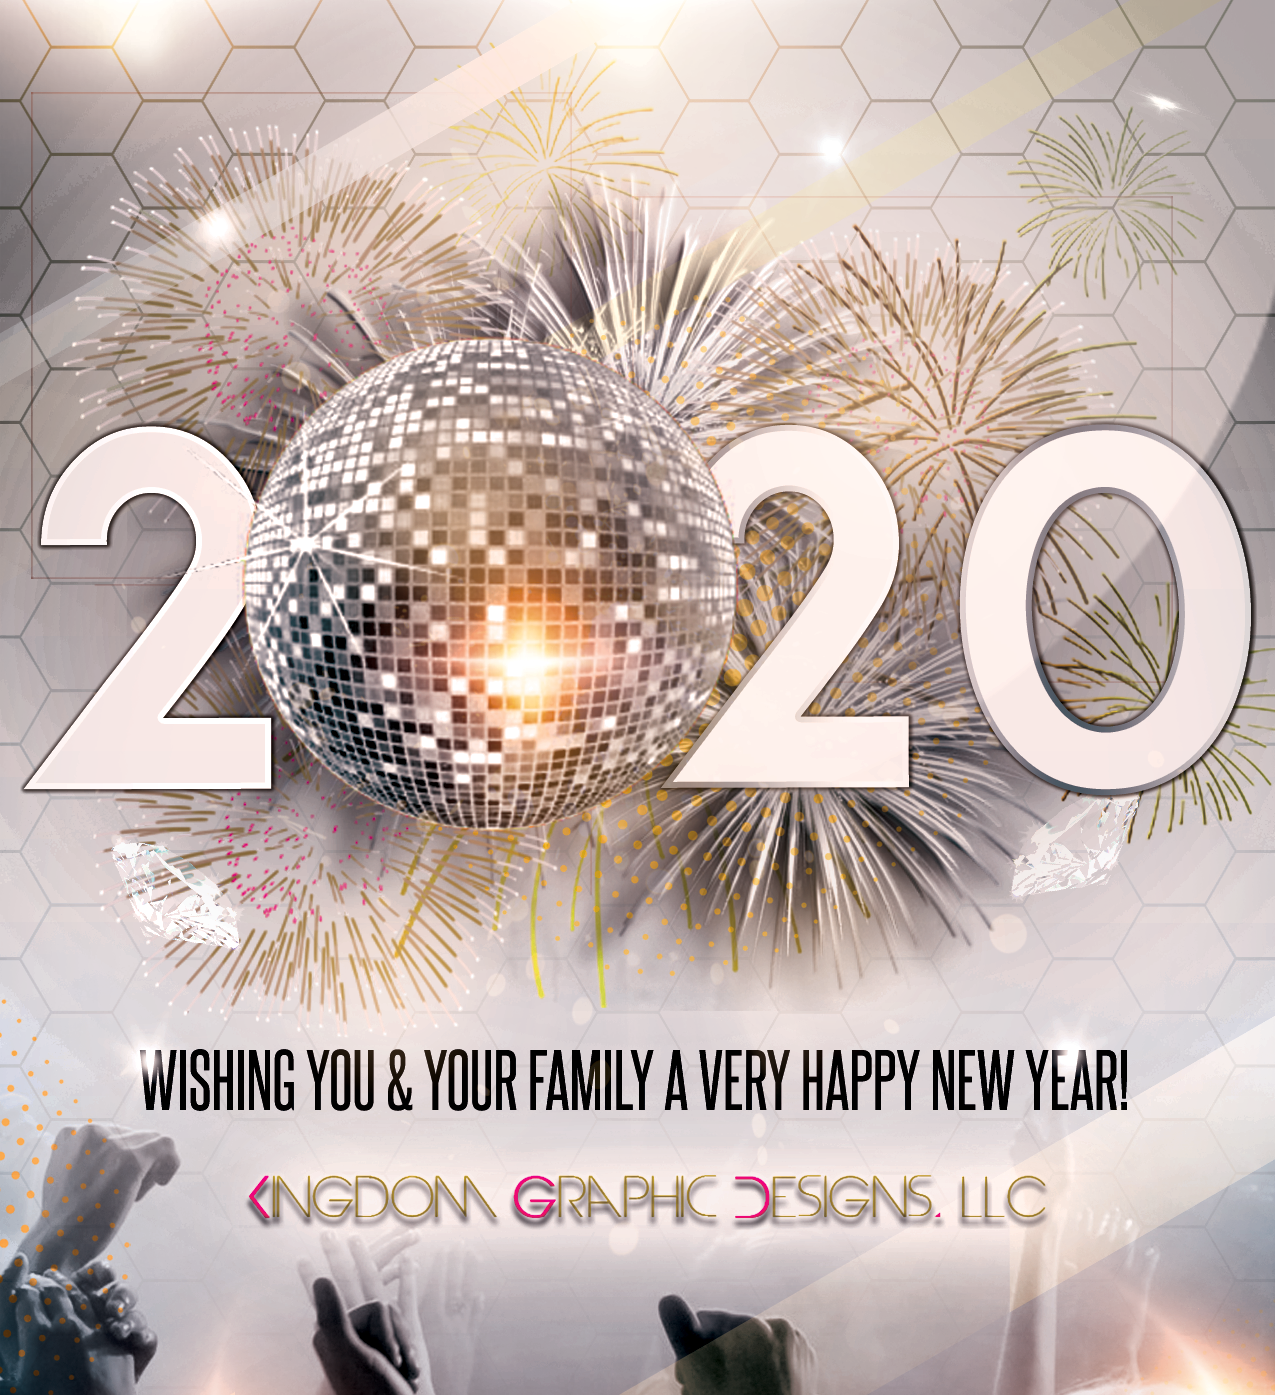 103-hny-2020-from-kgd-16142775621496.png